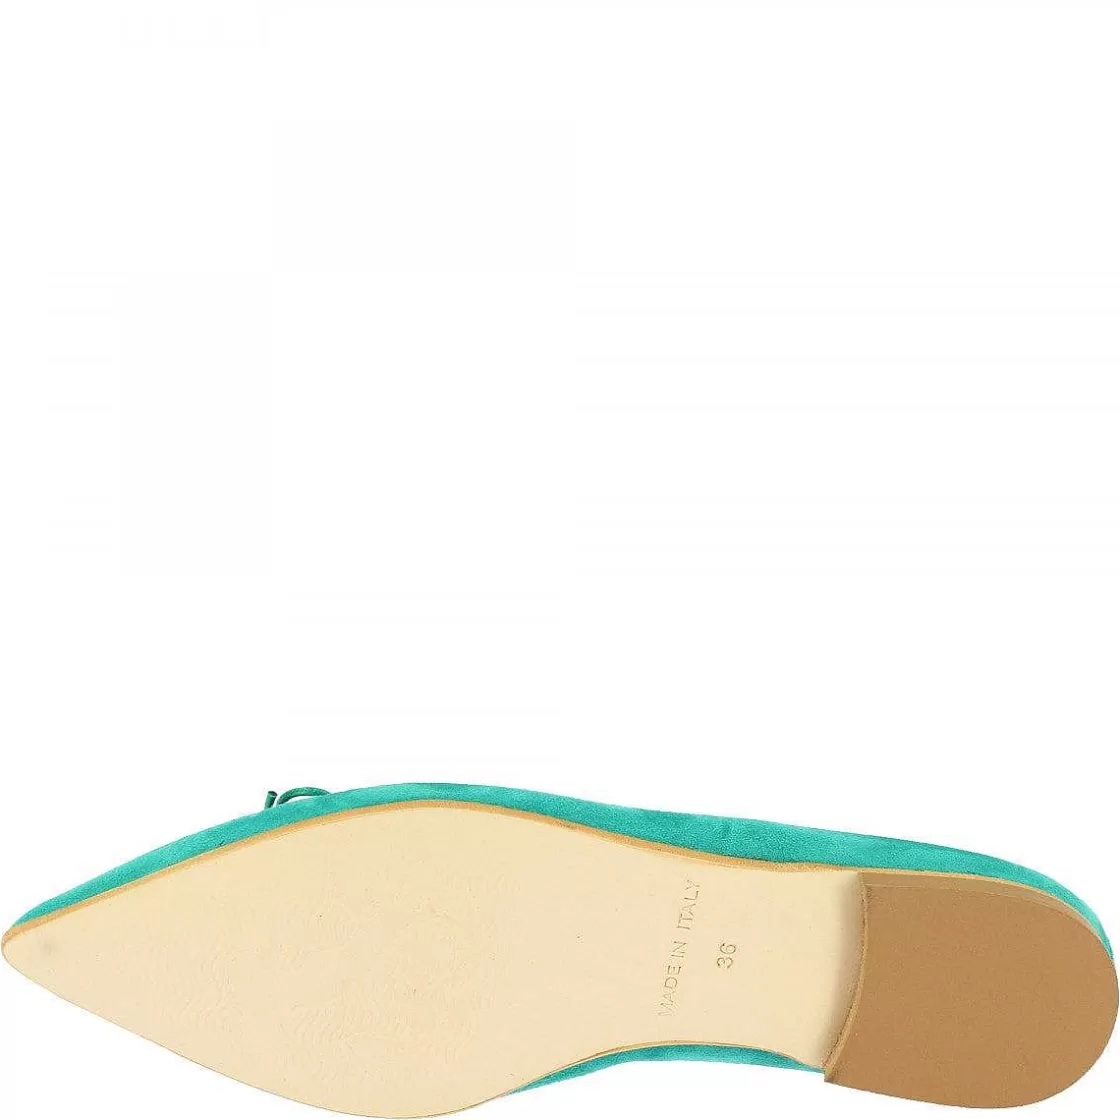 Leonardo Women'S Handmade Pointed Toe Slip-On Ballet Flats Shoes In Turquoise Suede Leather Discount